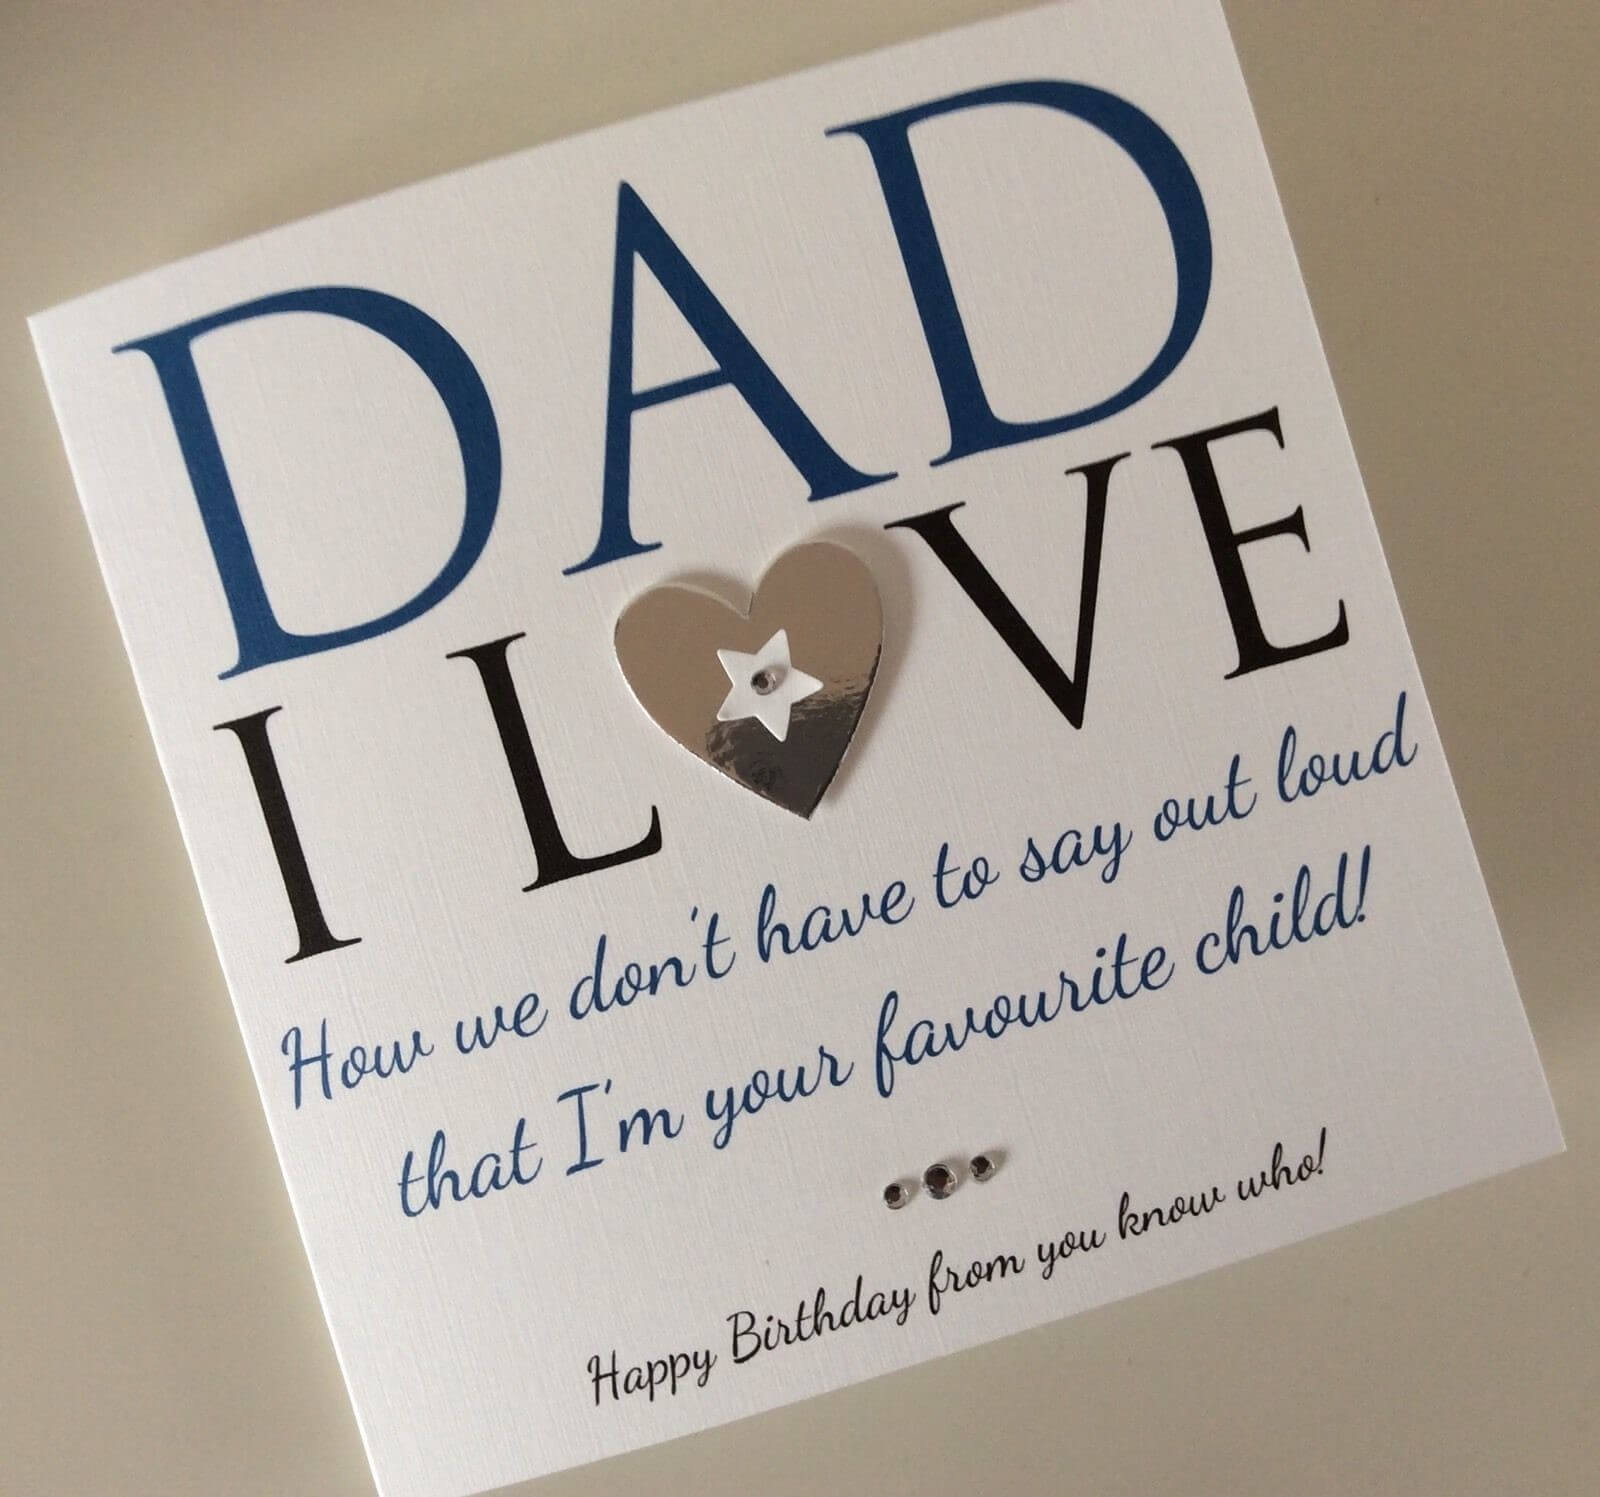 Cool Birthday Card Ideas For Mom Homemade Birthday Cards For Mom From Ba Happy Envelopes Dad